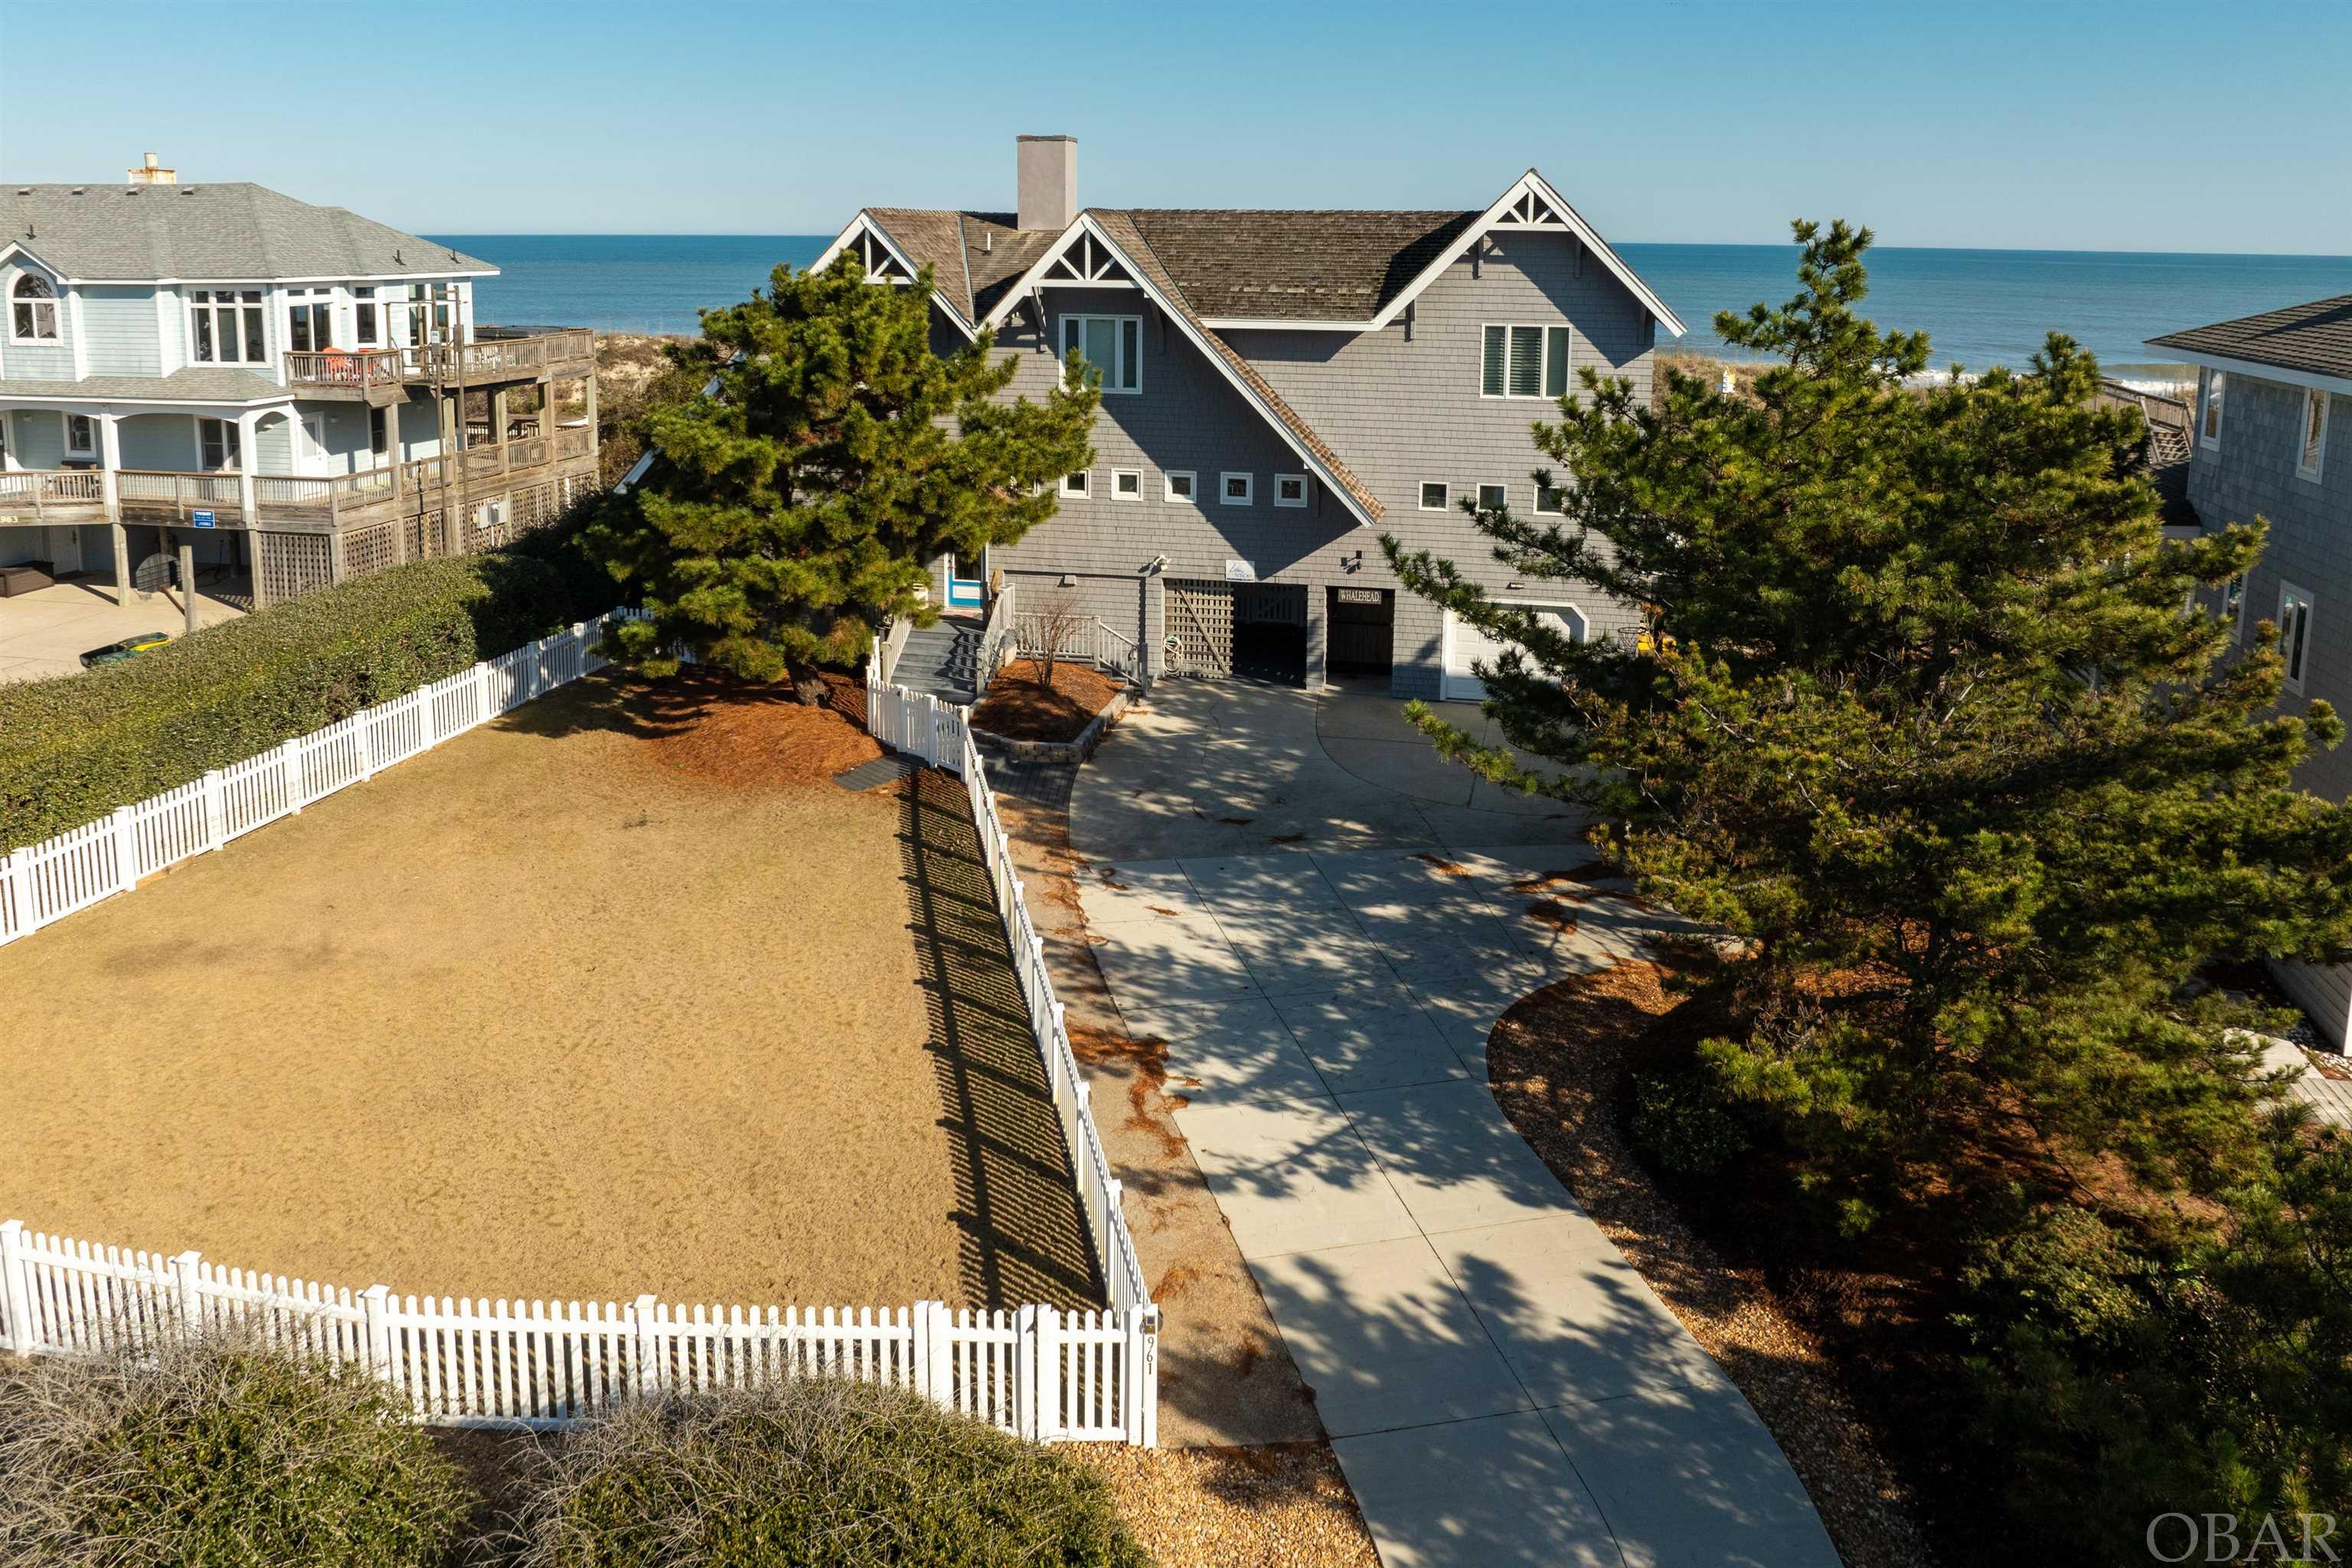 961 Lighthouse Drive, Corolla, NC 27927, 5 Bedrooms Bedrooms, ,4 BathroomsBathrooms,Residential,For sale,Lighthouse Drive,124260